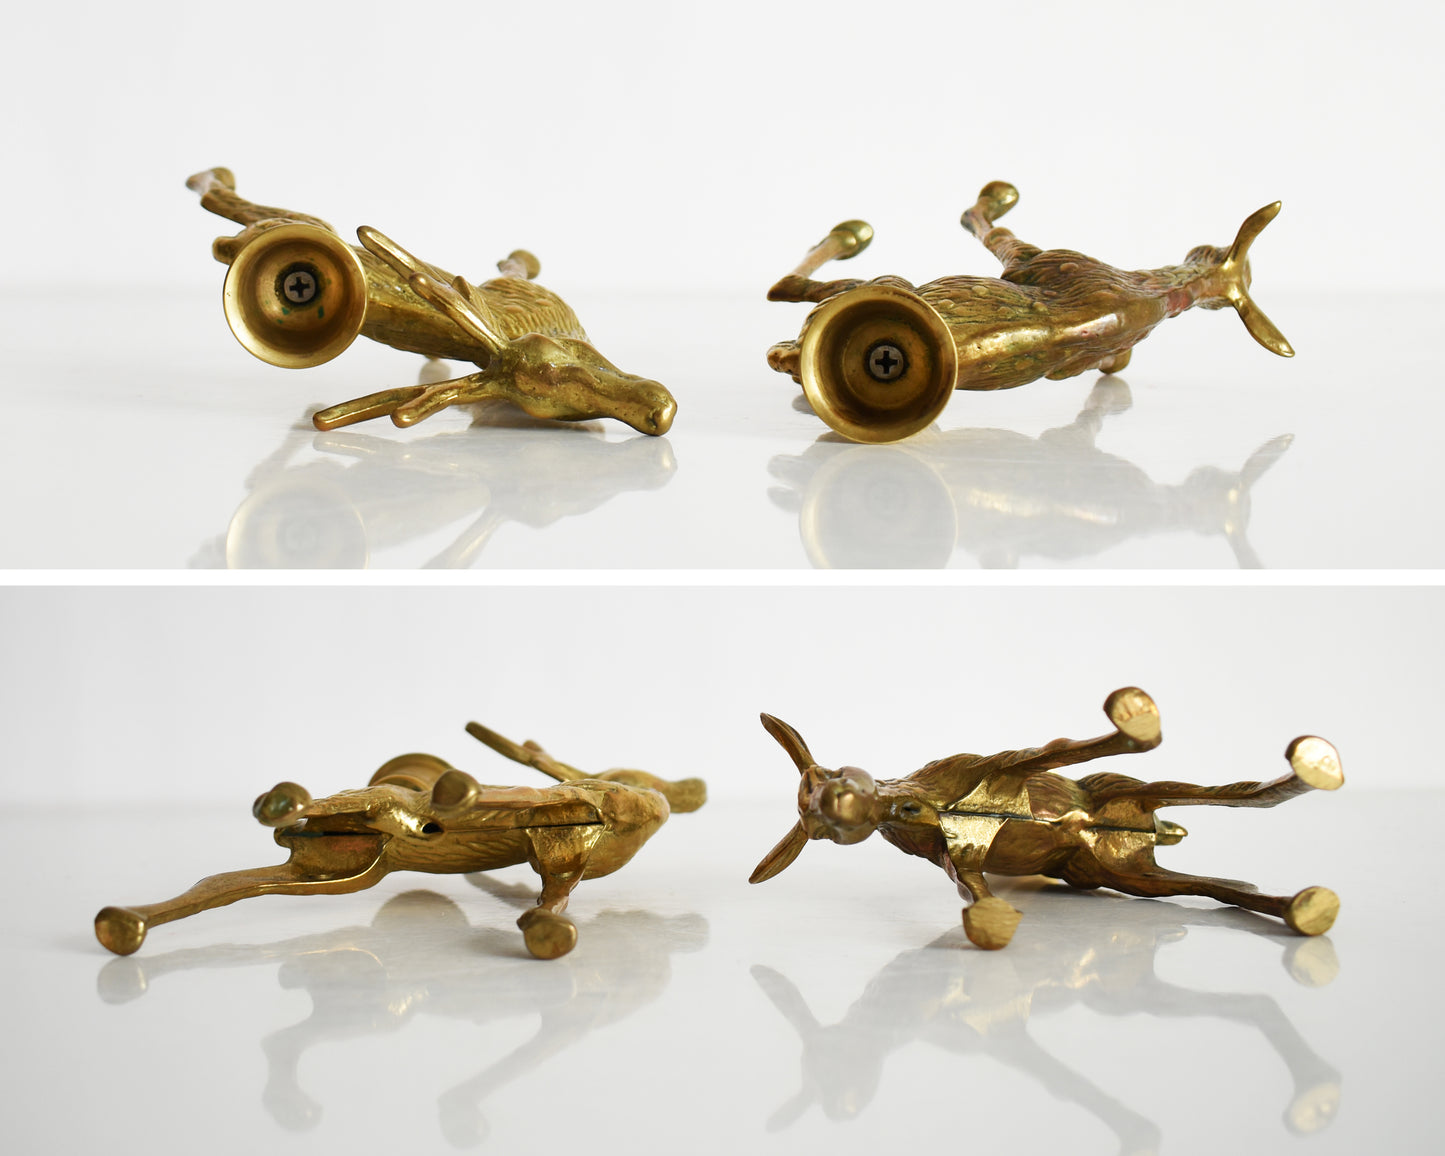 Side by side photos of the brass deer laying down showing the inside of the candleholders and the bottoms of the pieces